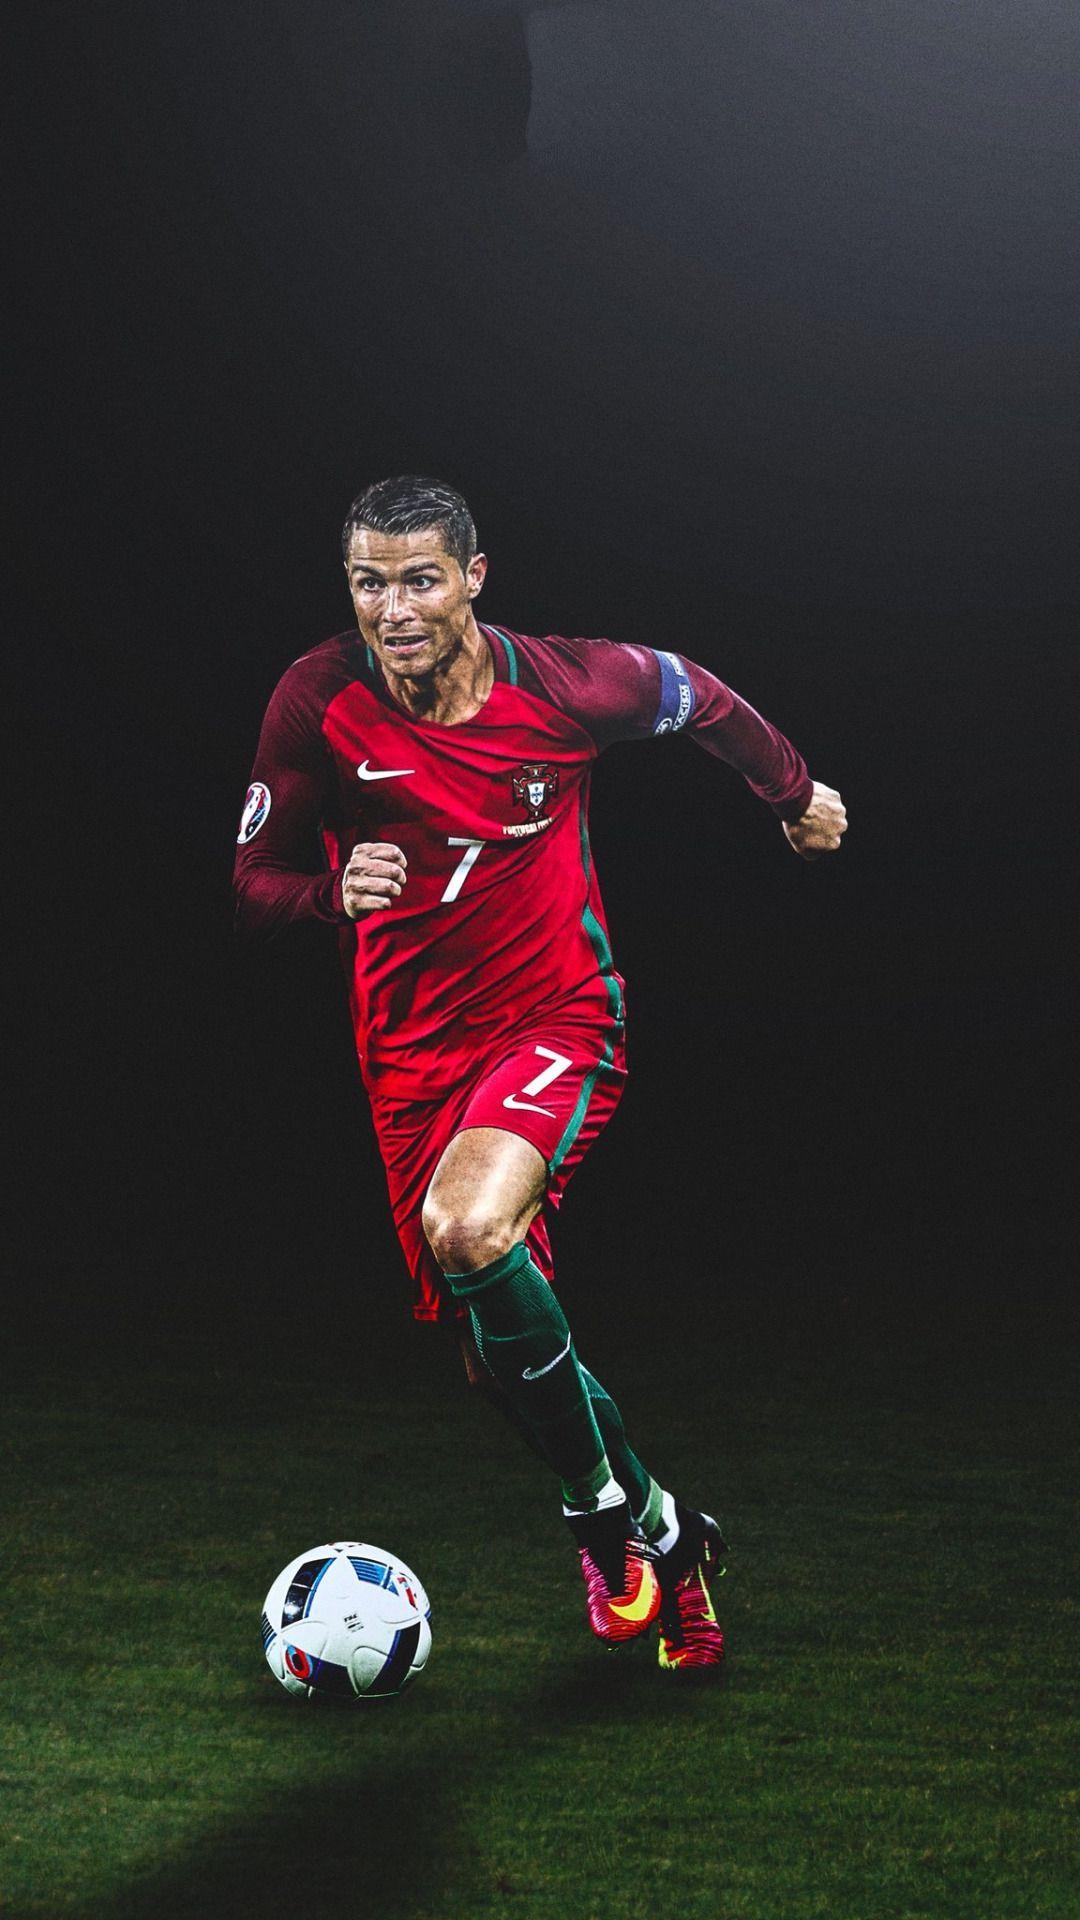 Cristiano Ronaldo Full HD 4K for Android APK iPhone X Wallpapers Free  Download